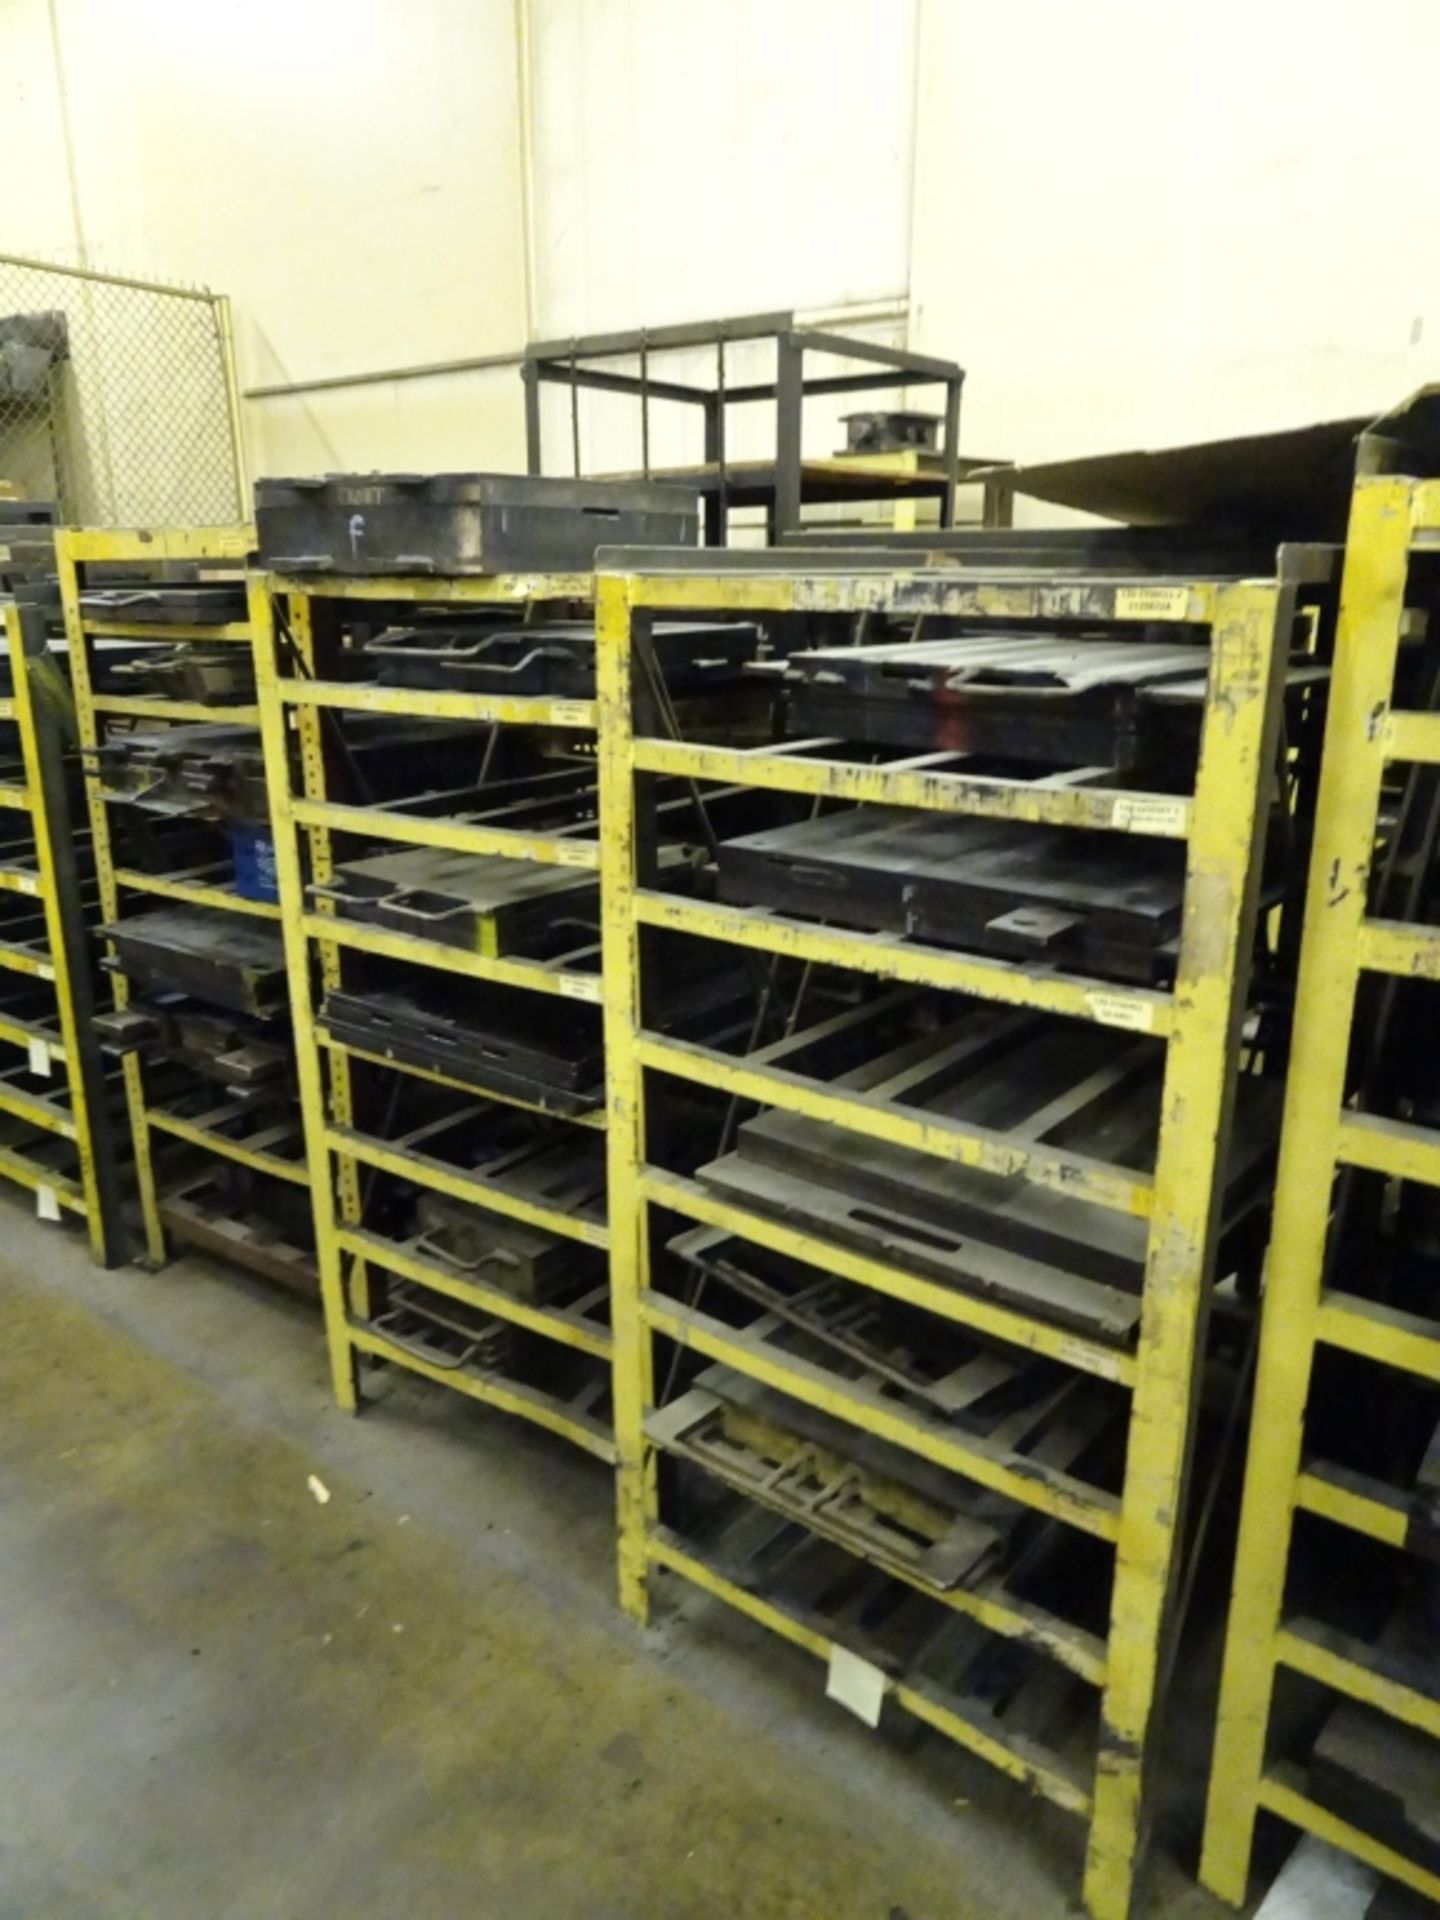 (13) Various Sized Heavy Duty Steel Mold Racks With No Contents - Image 5 of 6